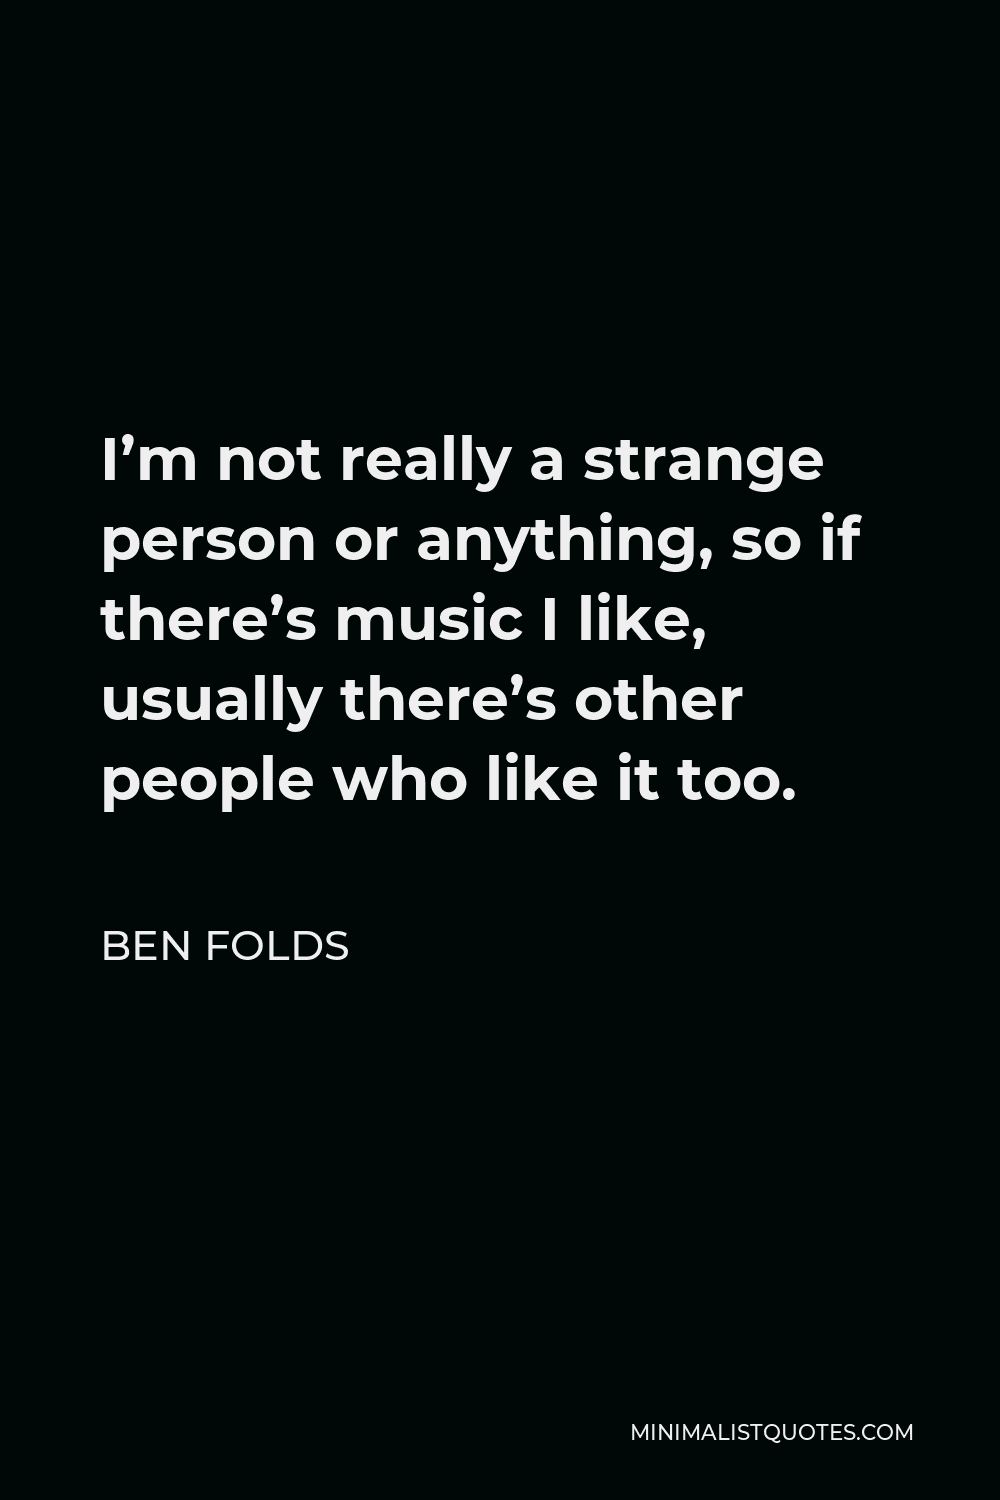 Ben Folds Quote - I’m not really a strange person or anything, so if there’s music I like, usually there’s other people who like it too.